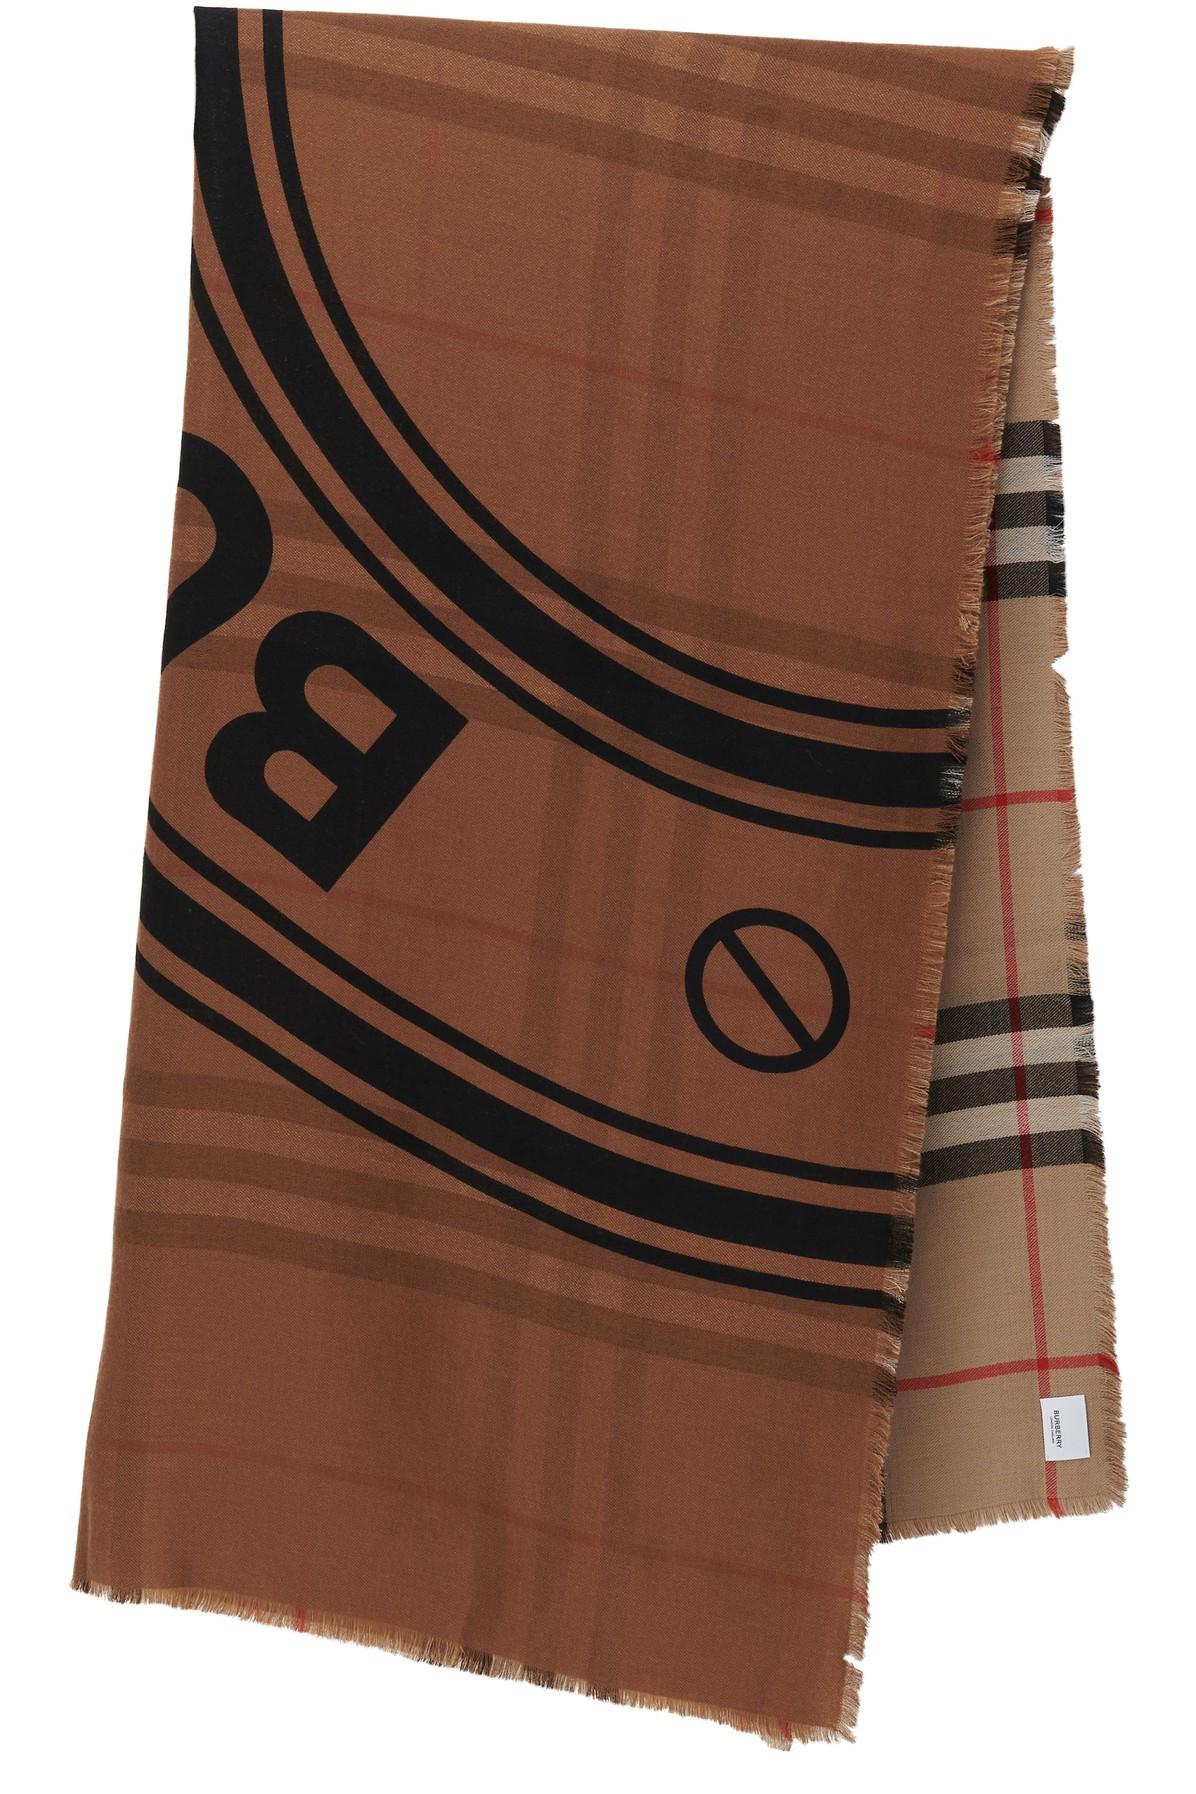 Burberry Reversible Logo Graphic And Check Cashmere Scarf in Brown | Lyst